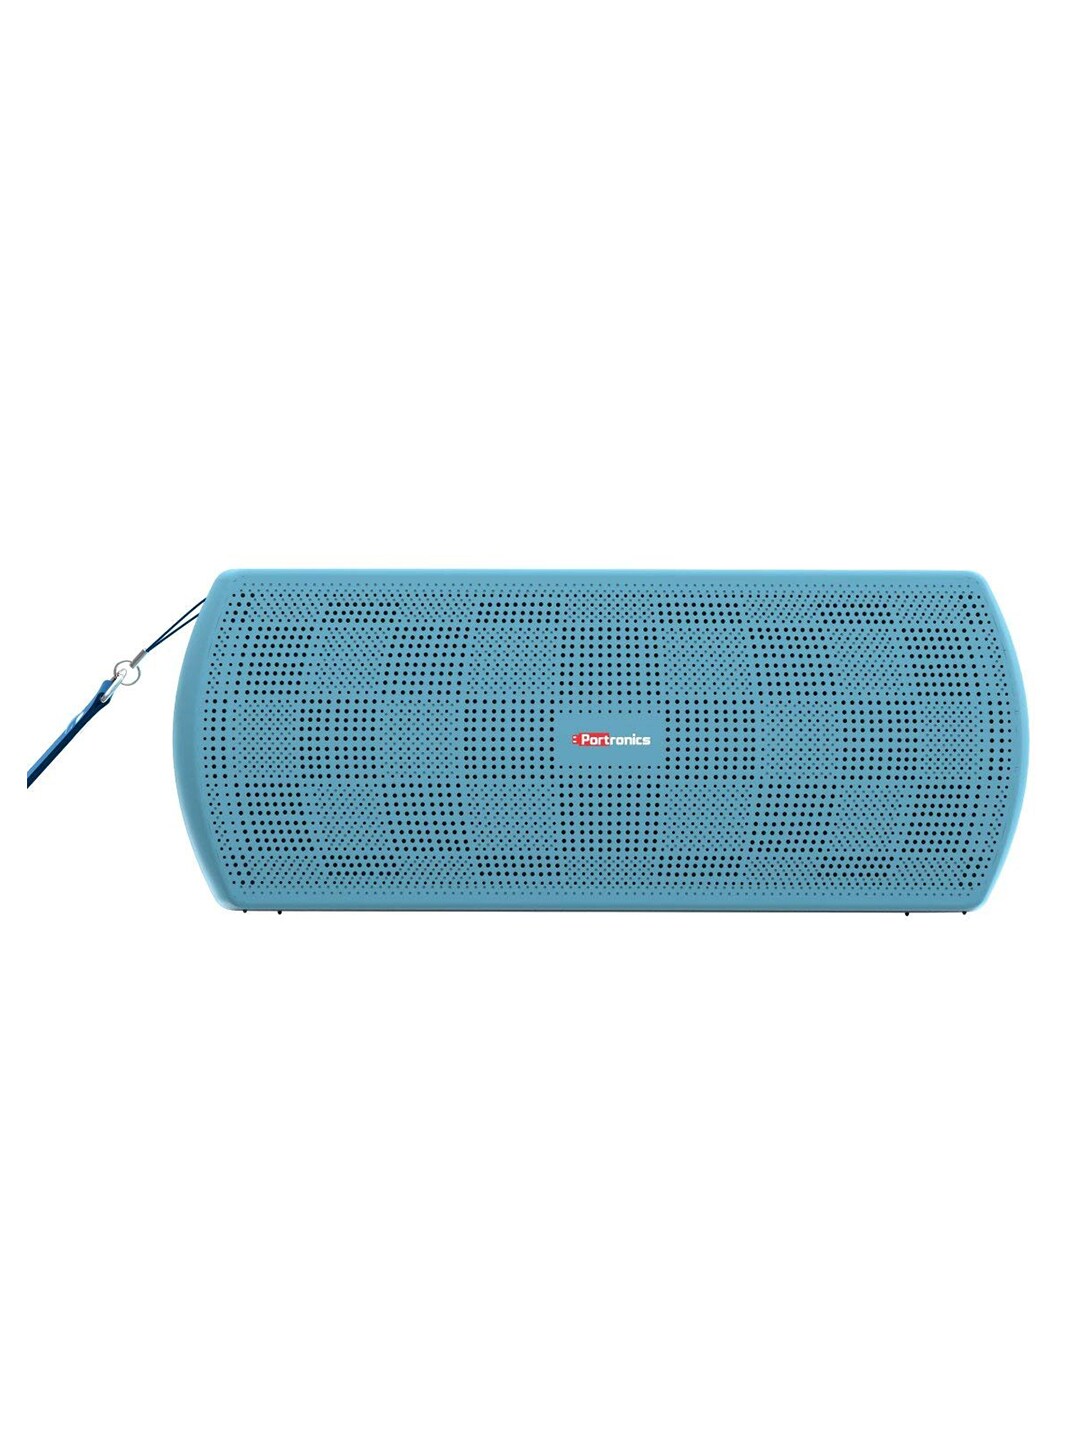 Portronics Blue Pure Sound Plus Bluetooth Stereo Speaker Price in India